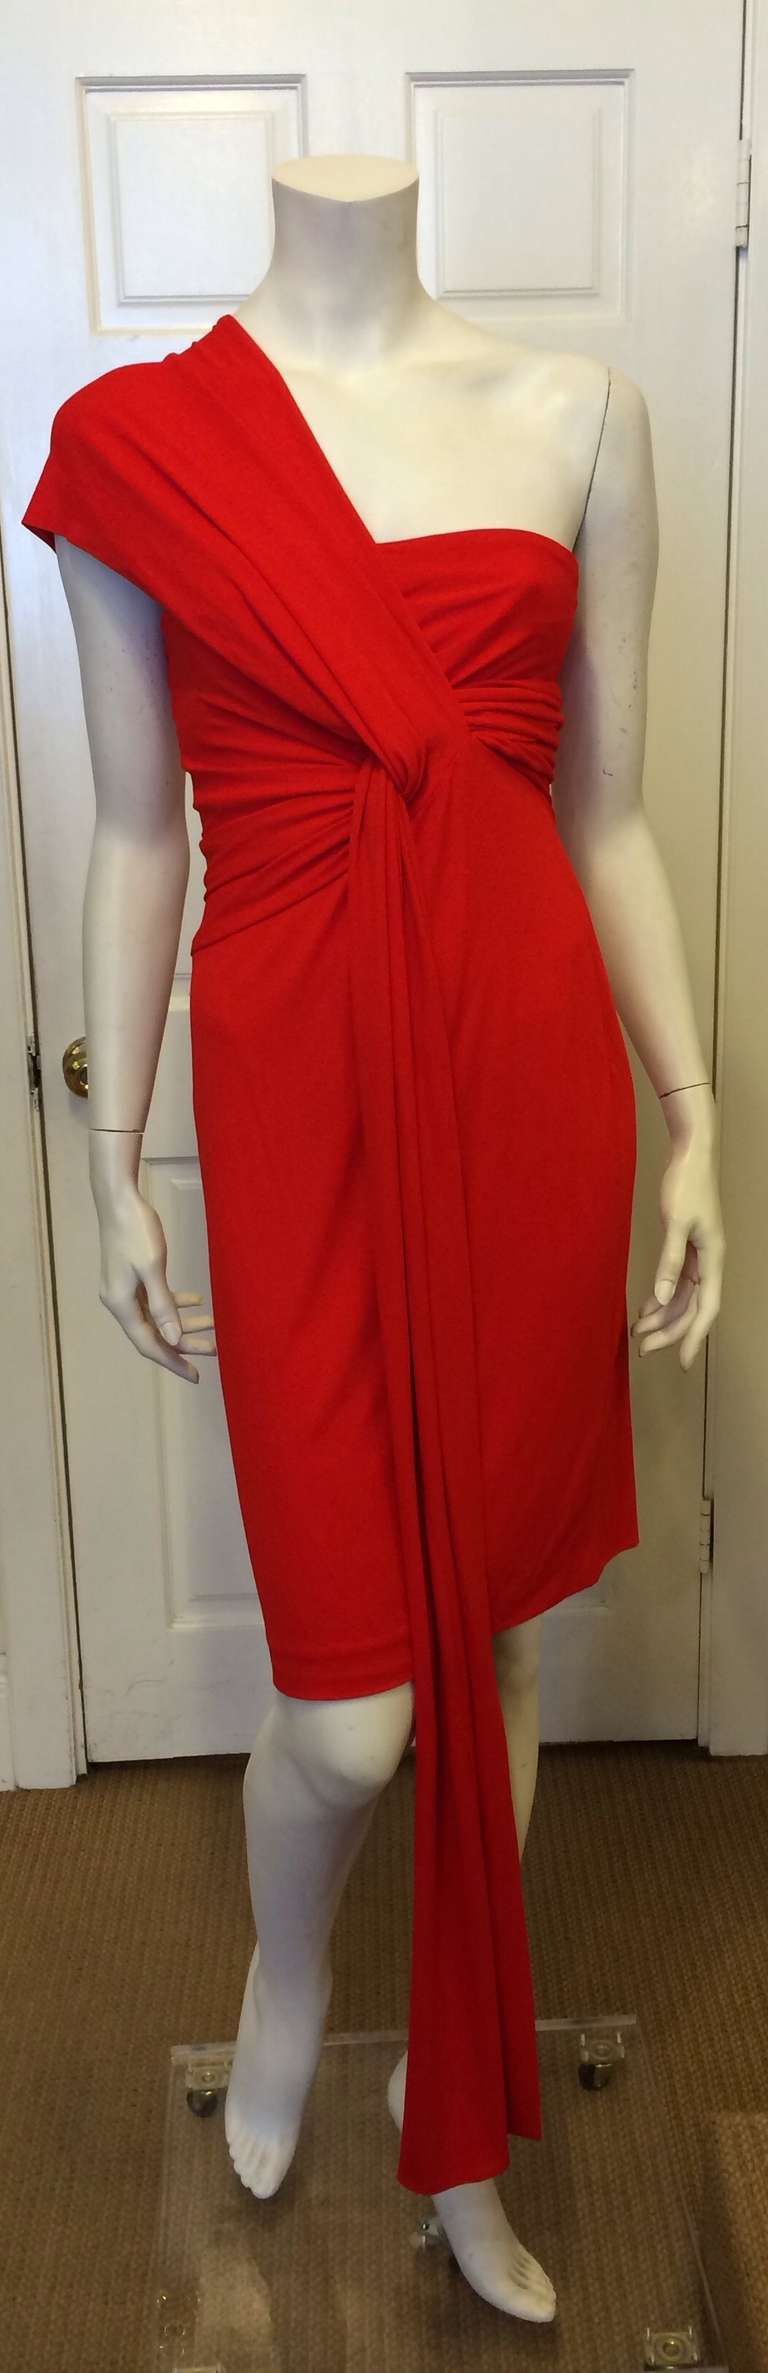 This dramatic red dress is a showstopper! With an attached sash that loops around one shoulder and under the other to create a beautiful draping look, this dress has an archetypical femme fatale feel. Though it looks complex, the twisted front is